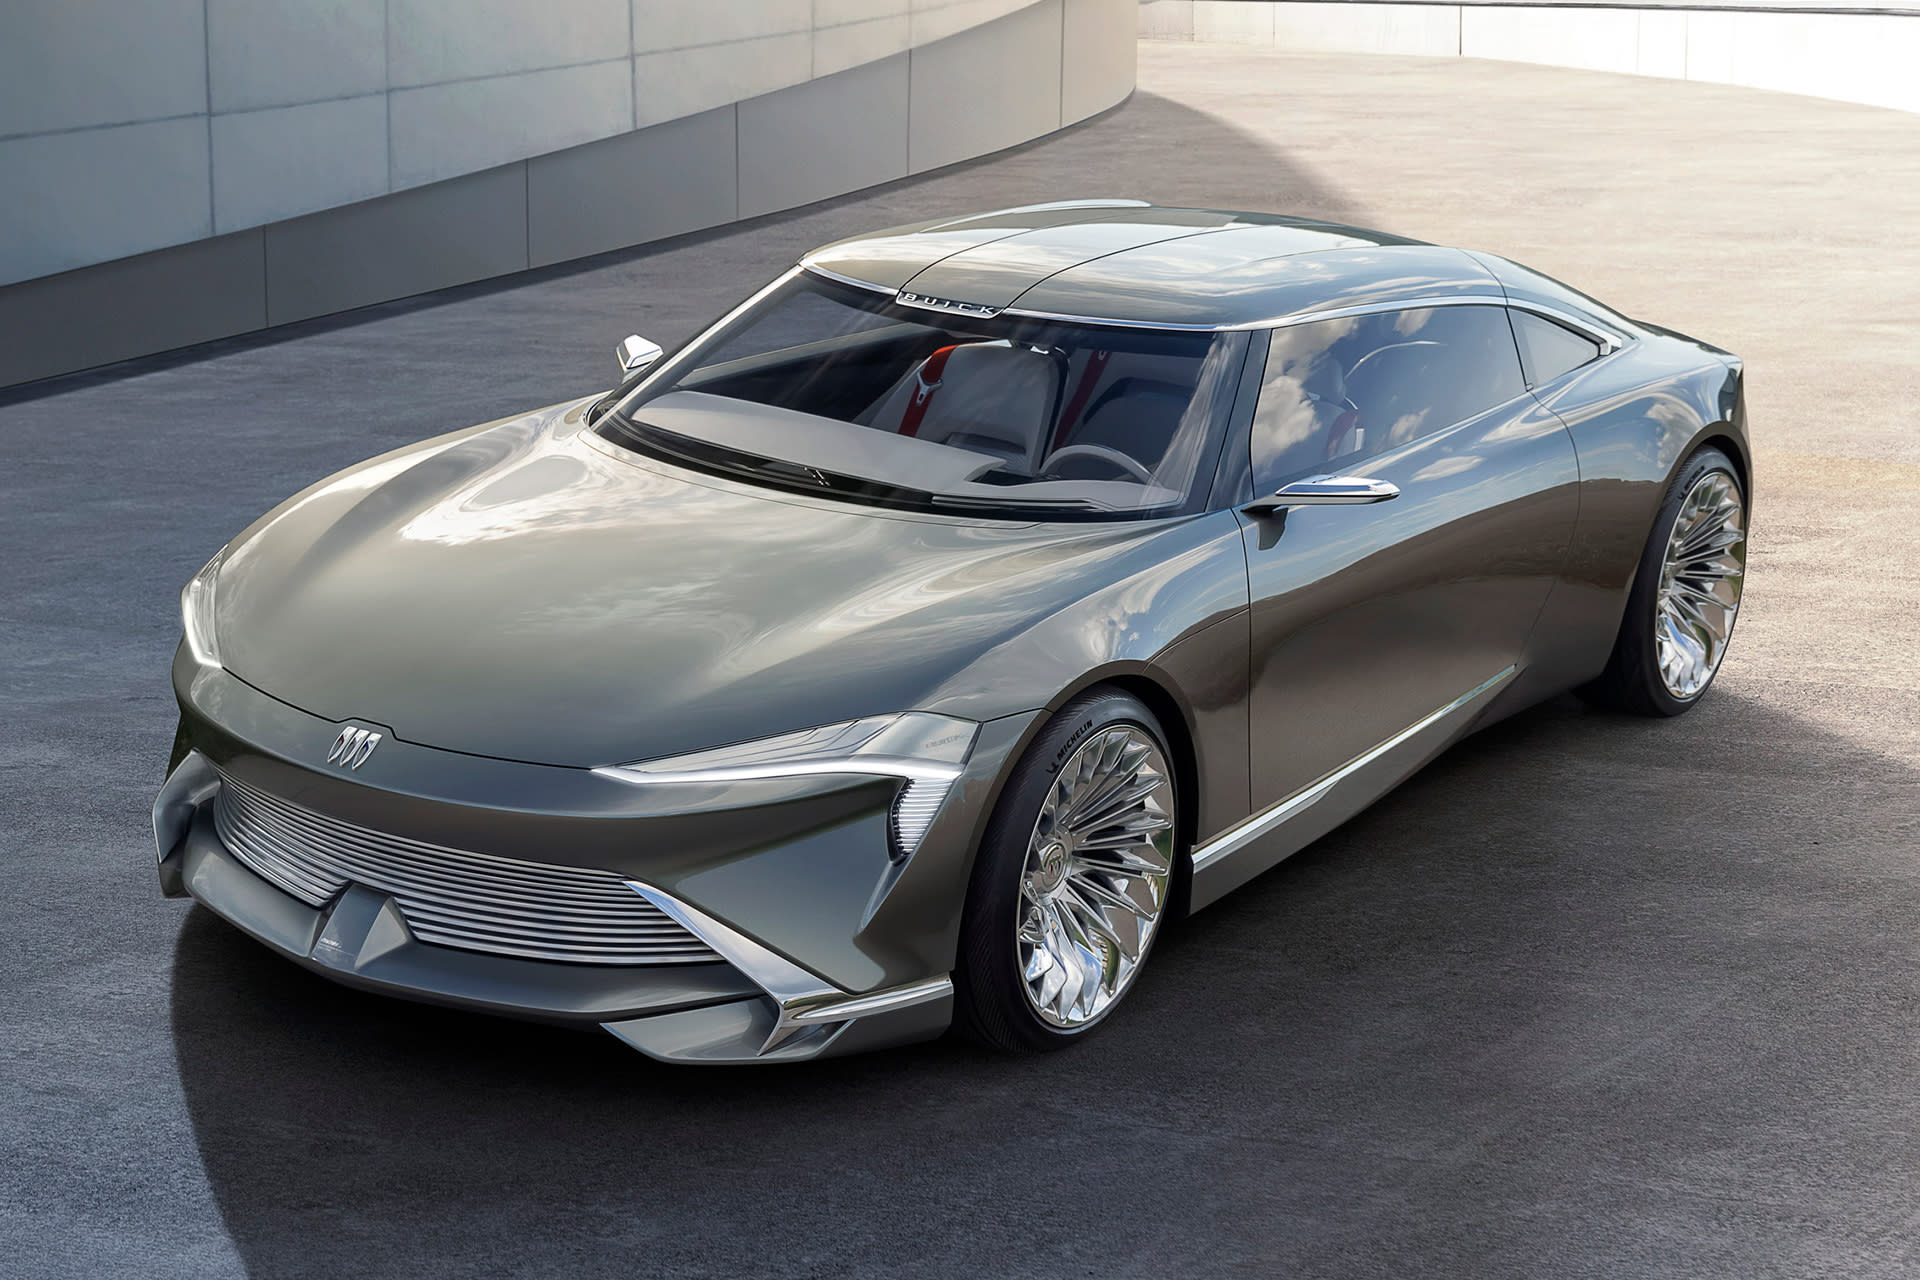 Buick's Wildcat concept shows how the brand is approaching EVs | Engadget